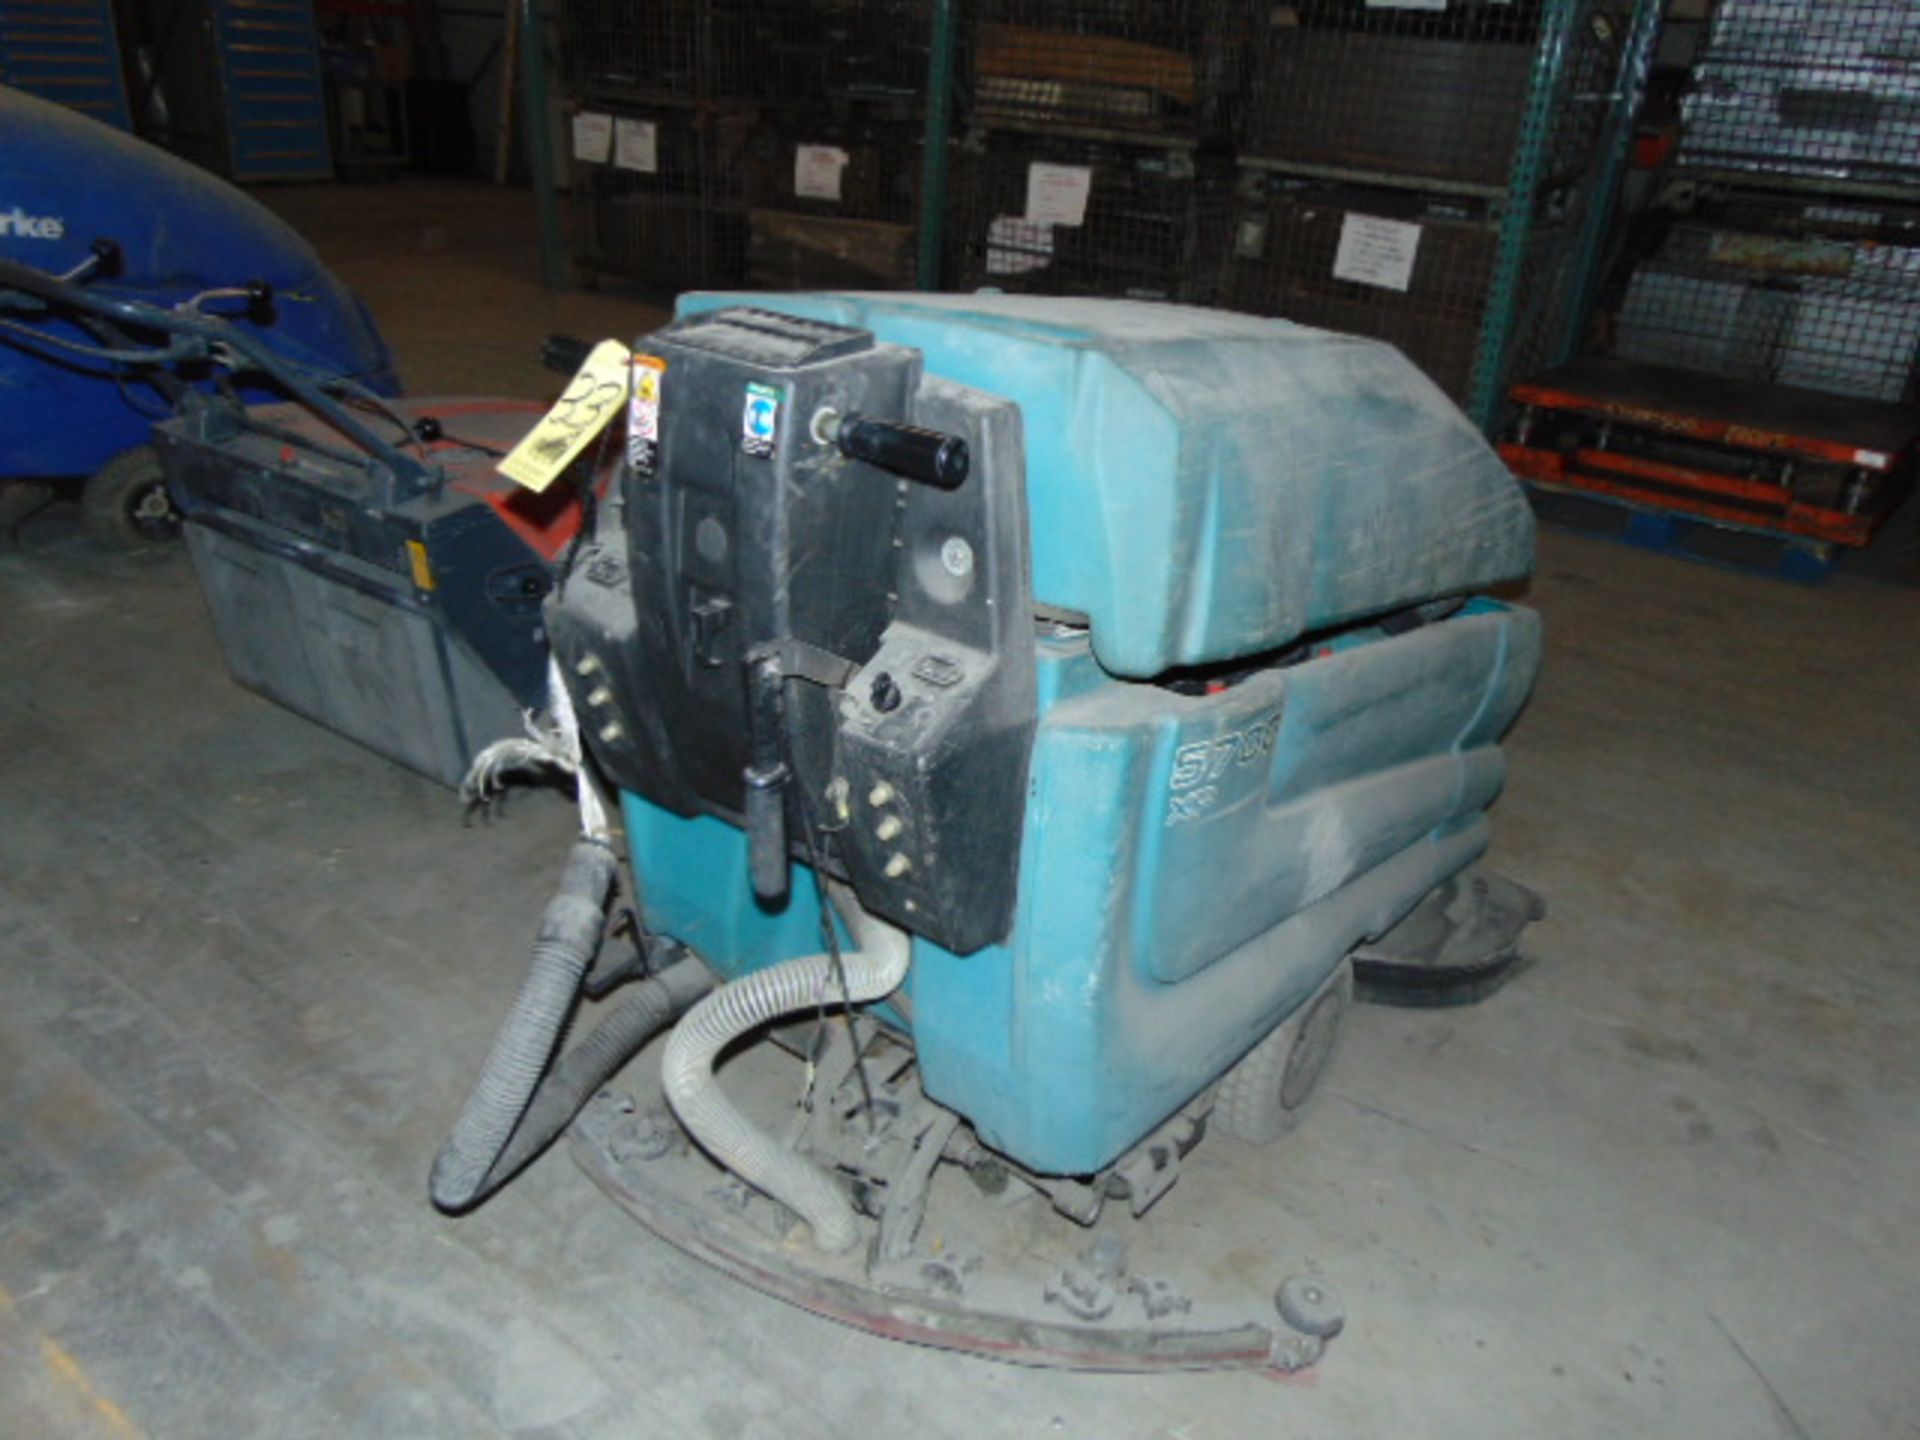 WALK BEHIND FLOOR SCRUBBER, TENNANT MDL. 5700XP, battery pwrd. (out of service) - Image 2 of 2